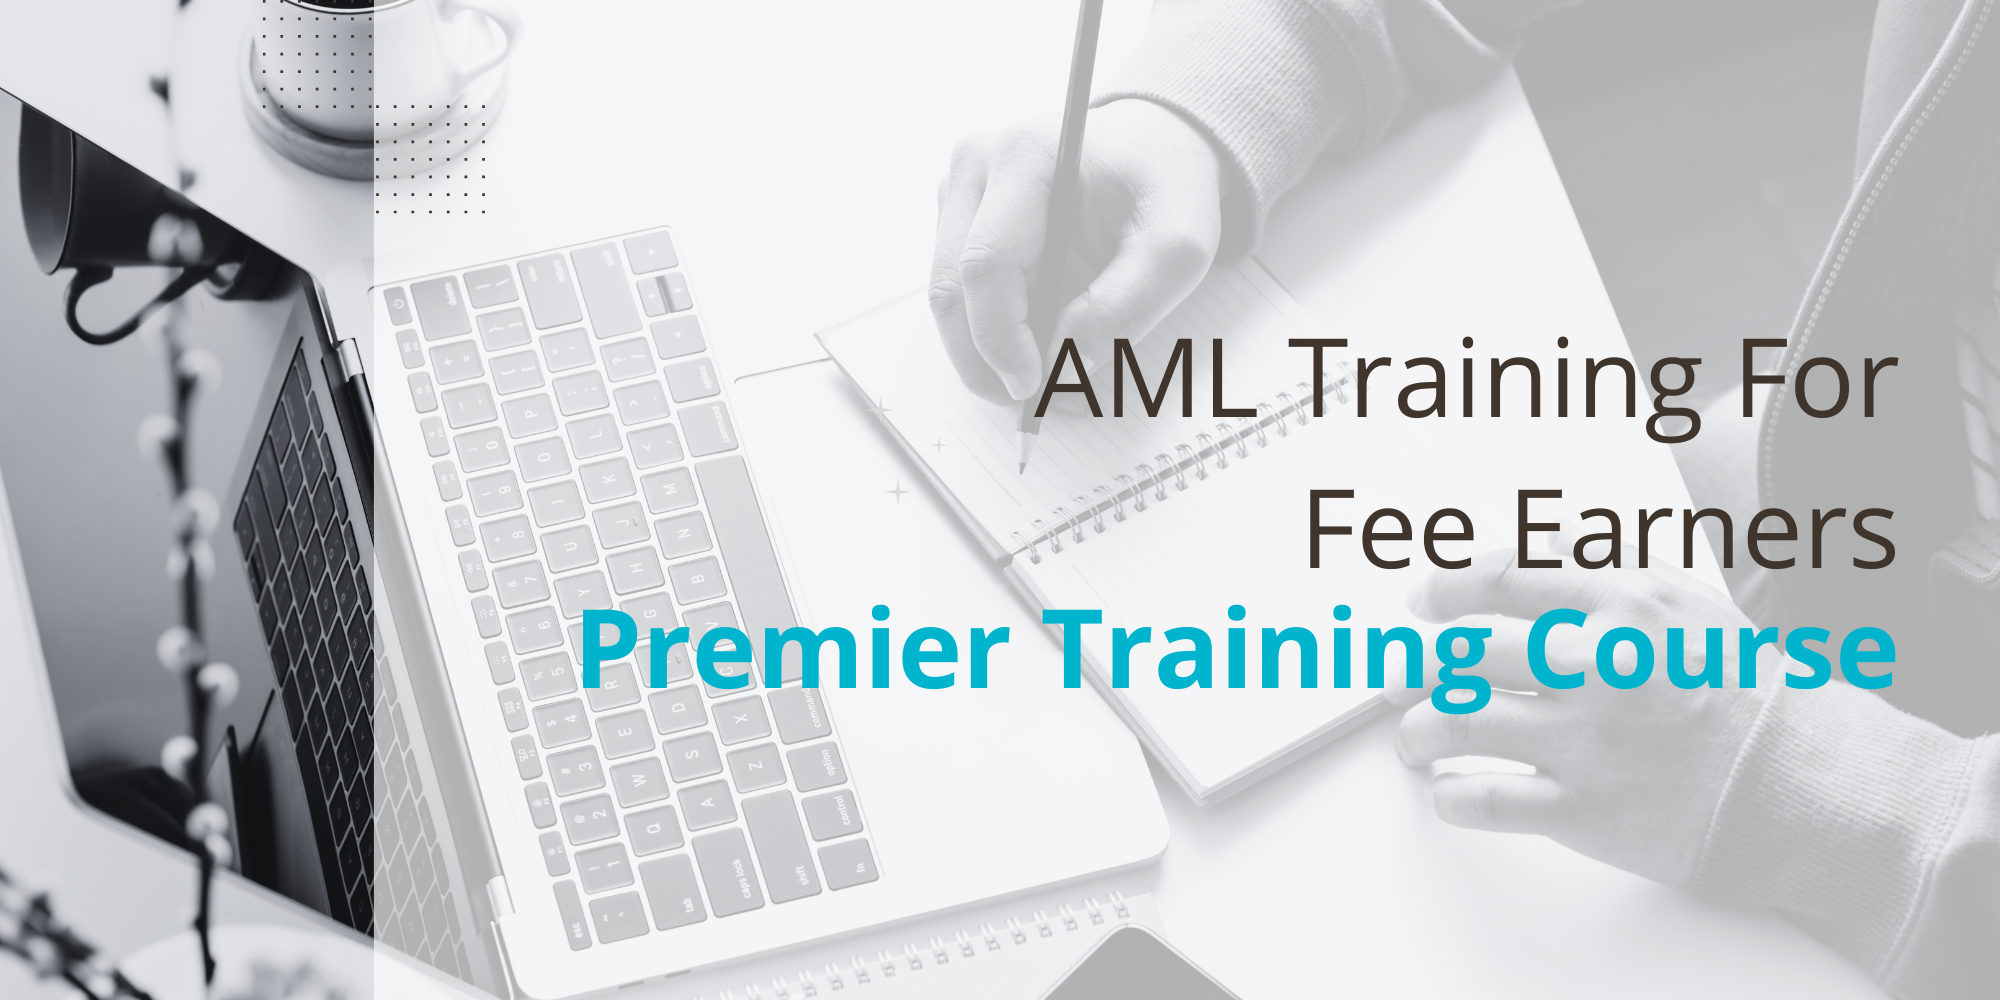 Anti-Money Laundering (AML) Training For Fee Earners Course